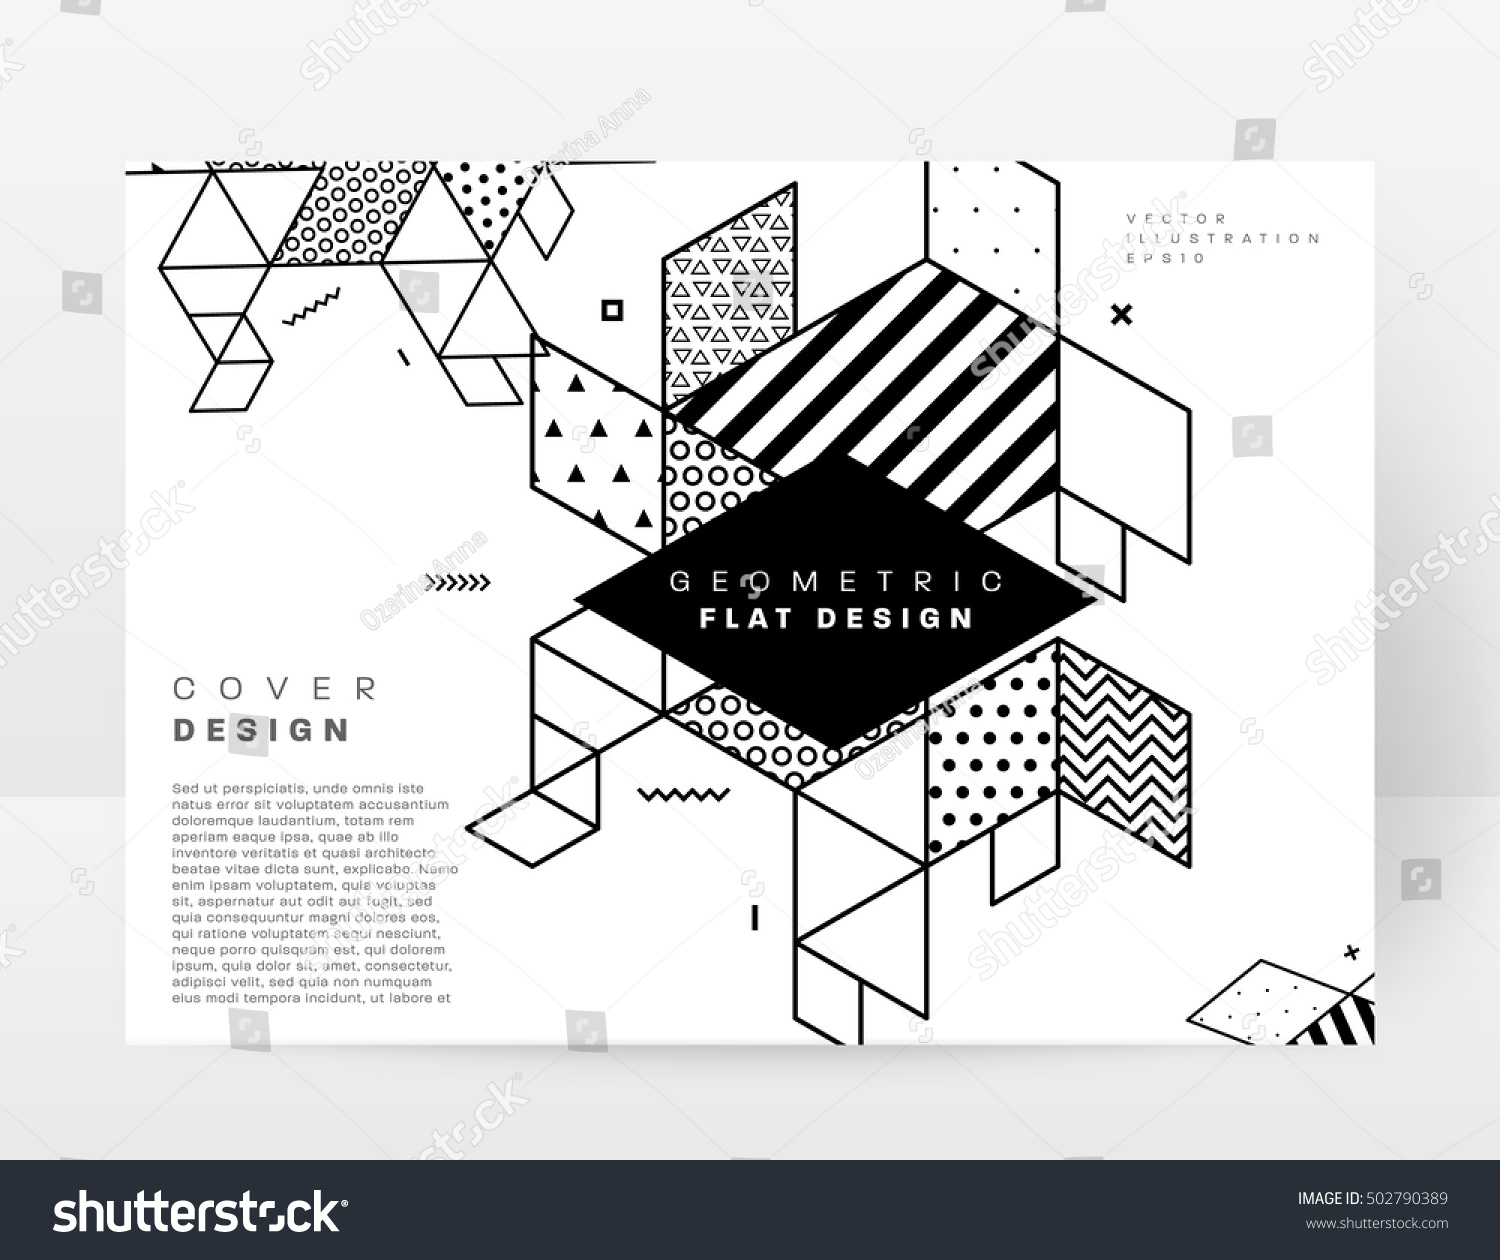 Geometric background Template for covers, flyers, banners, posters and placards, may be used for presentations and book covers, EPS10 vector illustration #502790389